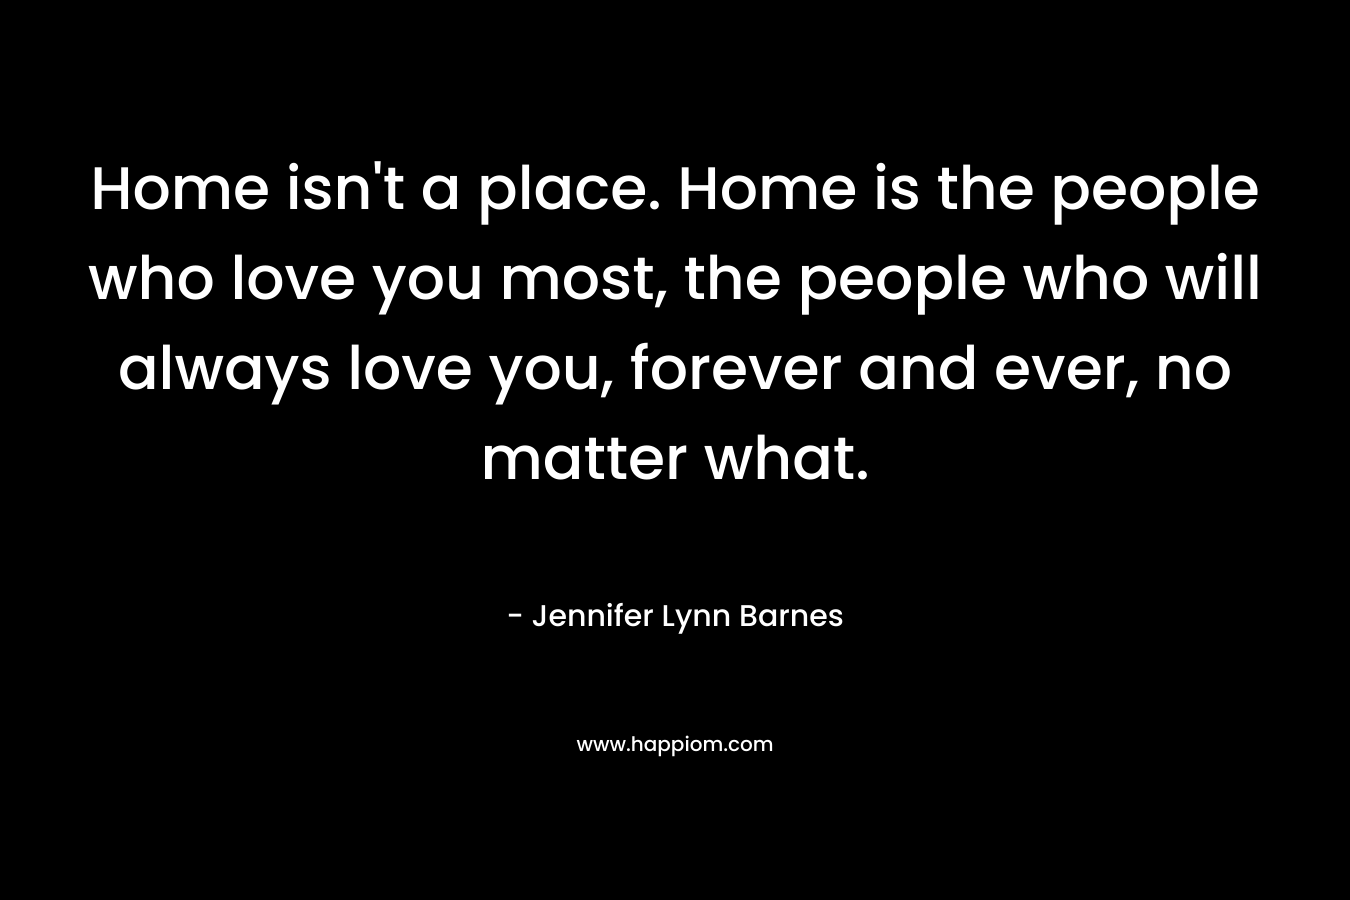 Home isn't a place. Home is the people who love you most, the people who will always love you, forever and ever, no matter what.